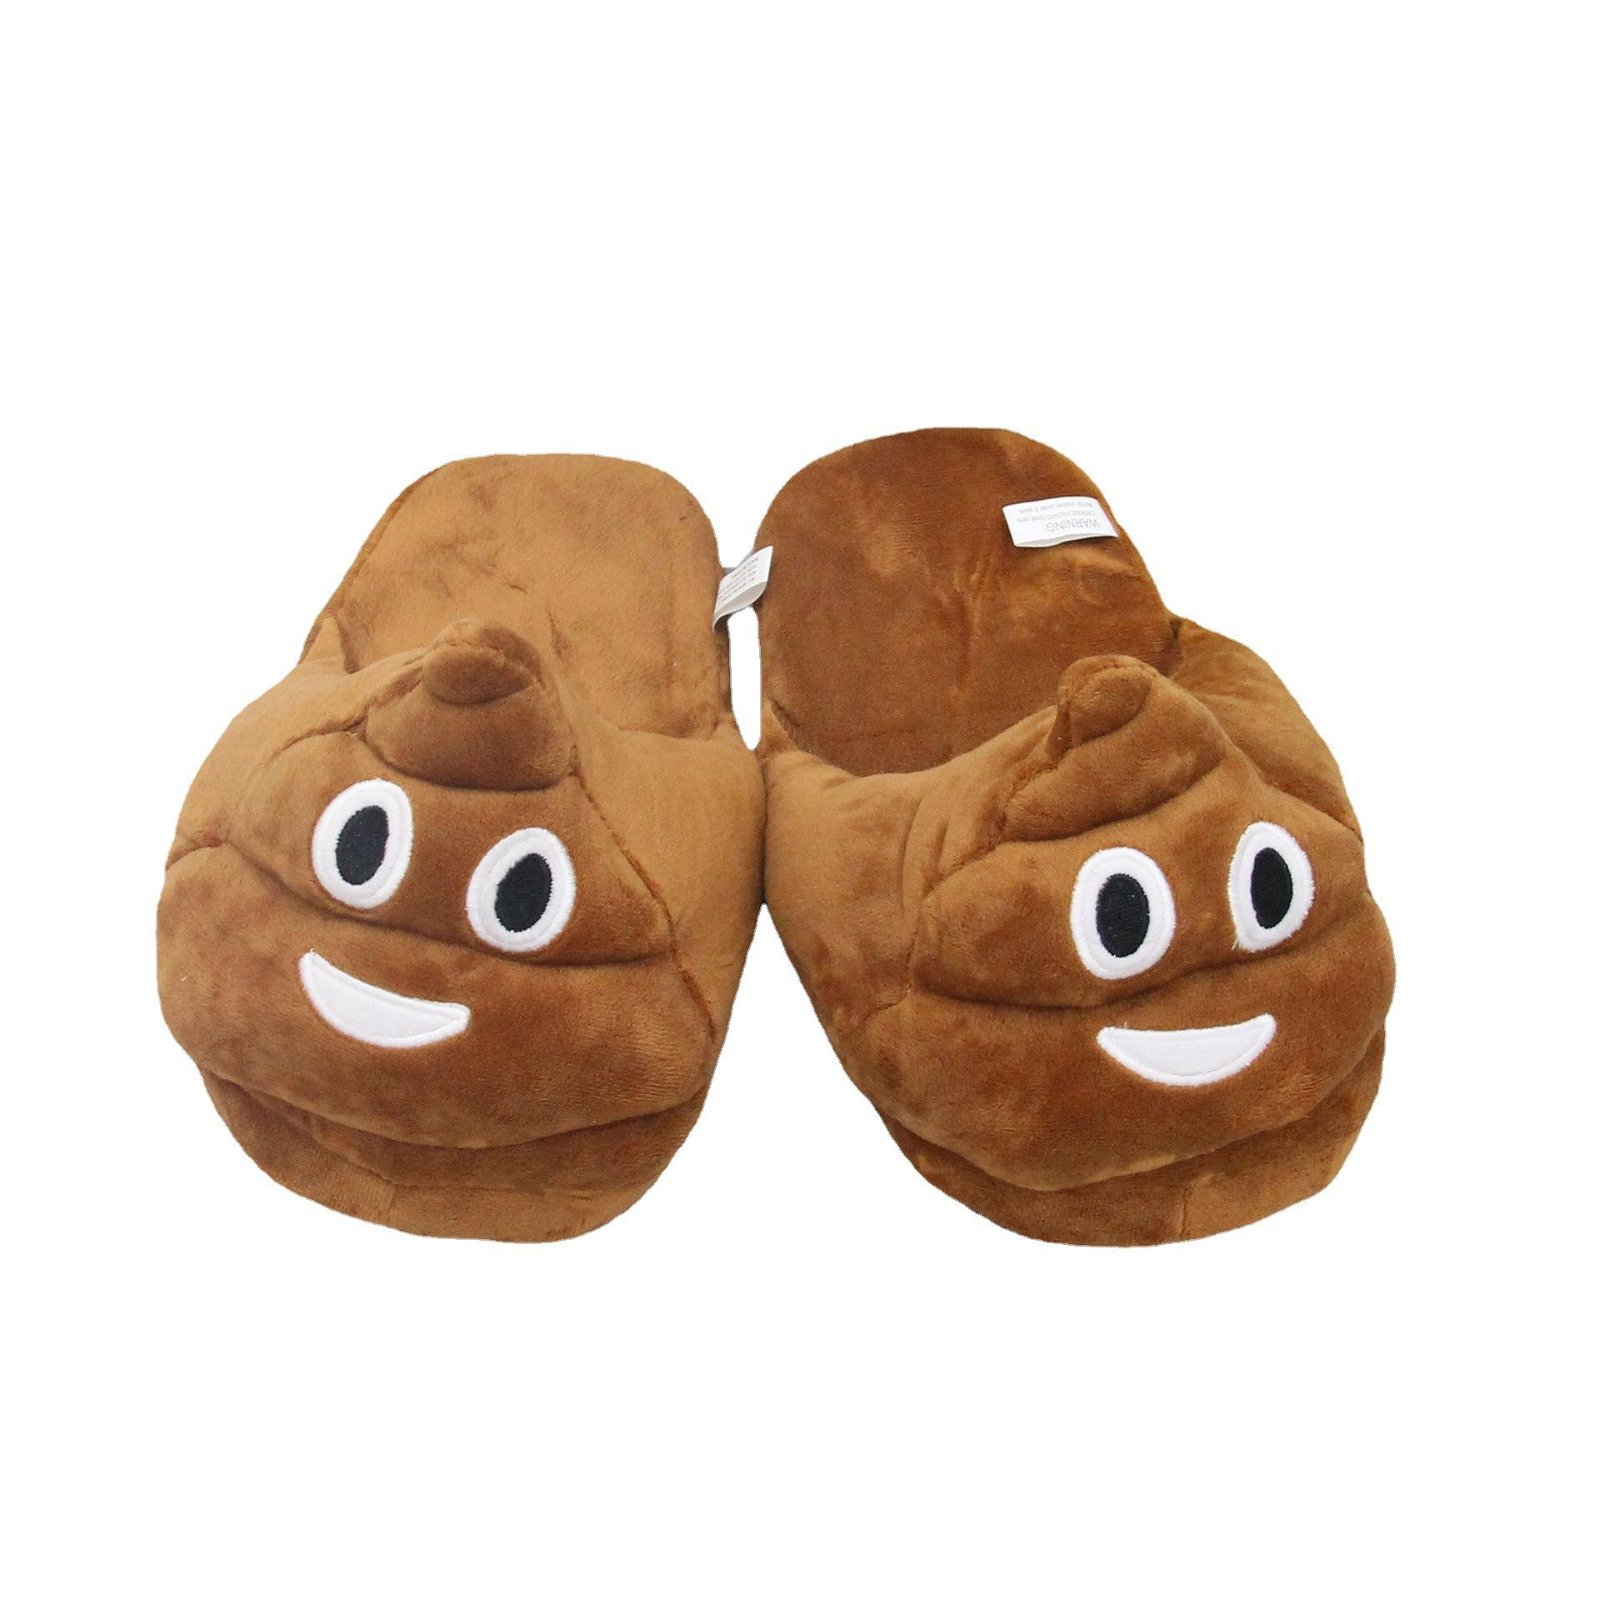 Emoji slippers,face slippers,Soft Plush Emoji Slippers for adults  4